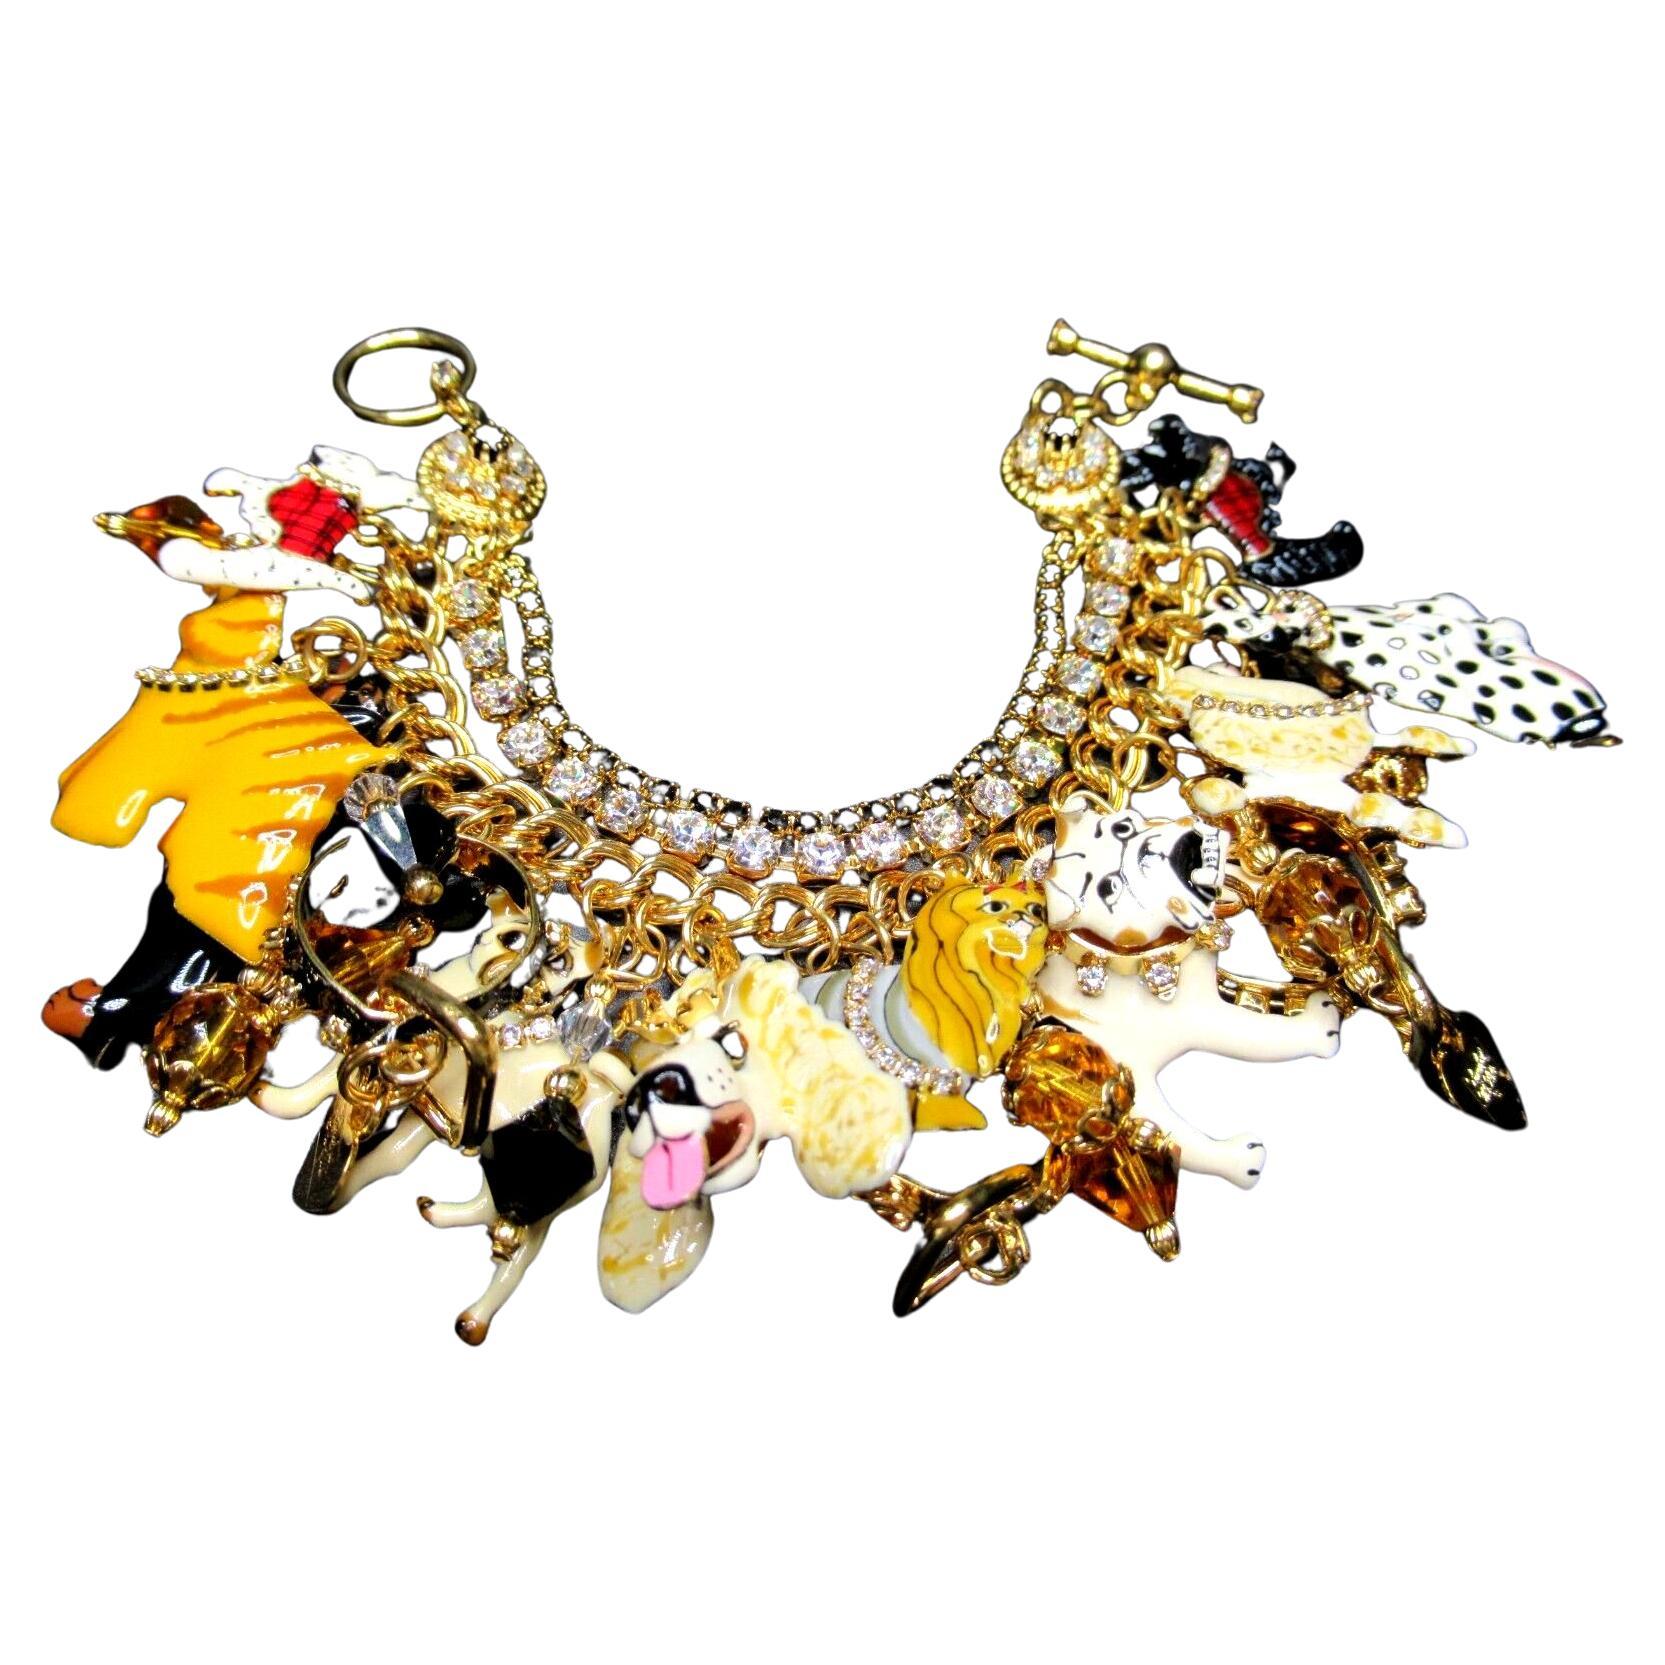 LUNCH AT THE RITZ Kennel Club Enamel and Crystal Dog Charm Statement Bracelet For Sale